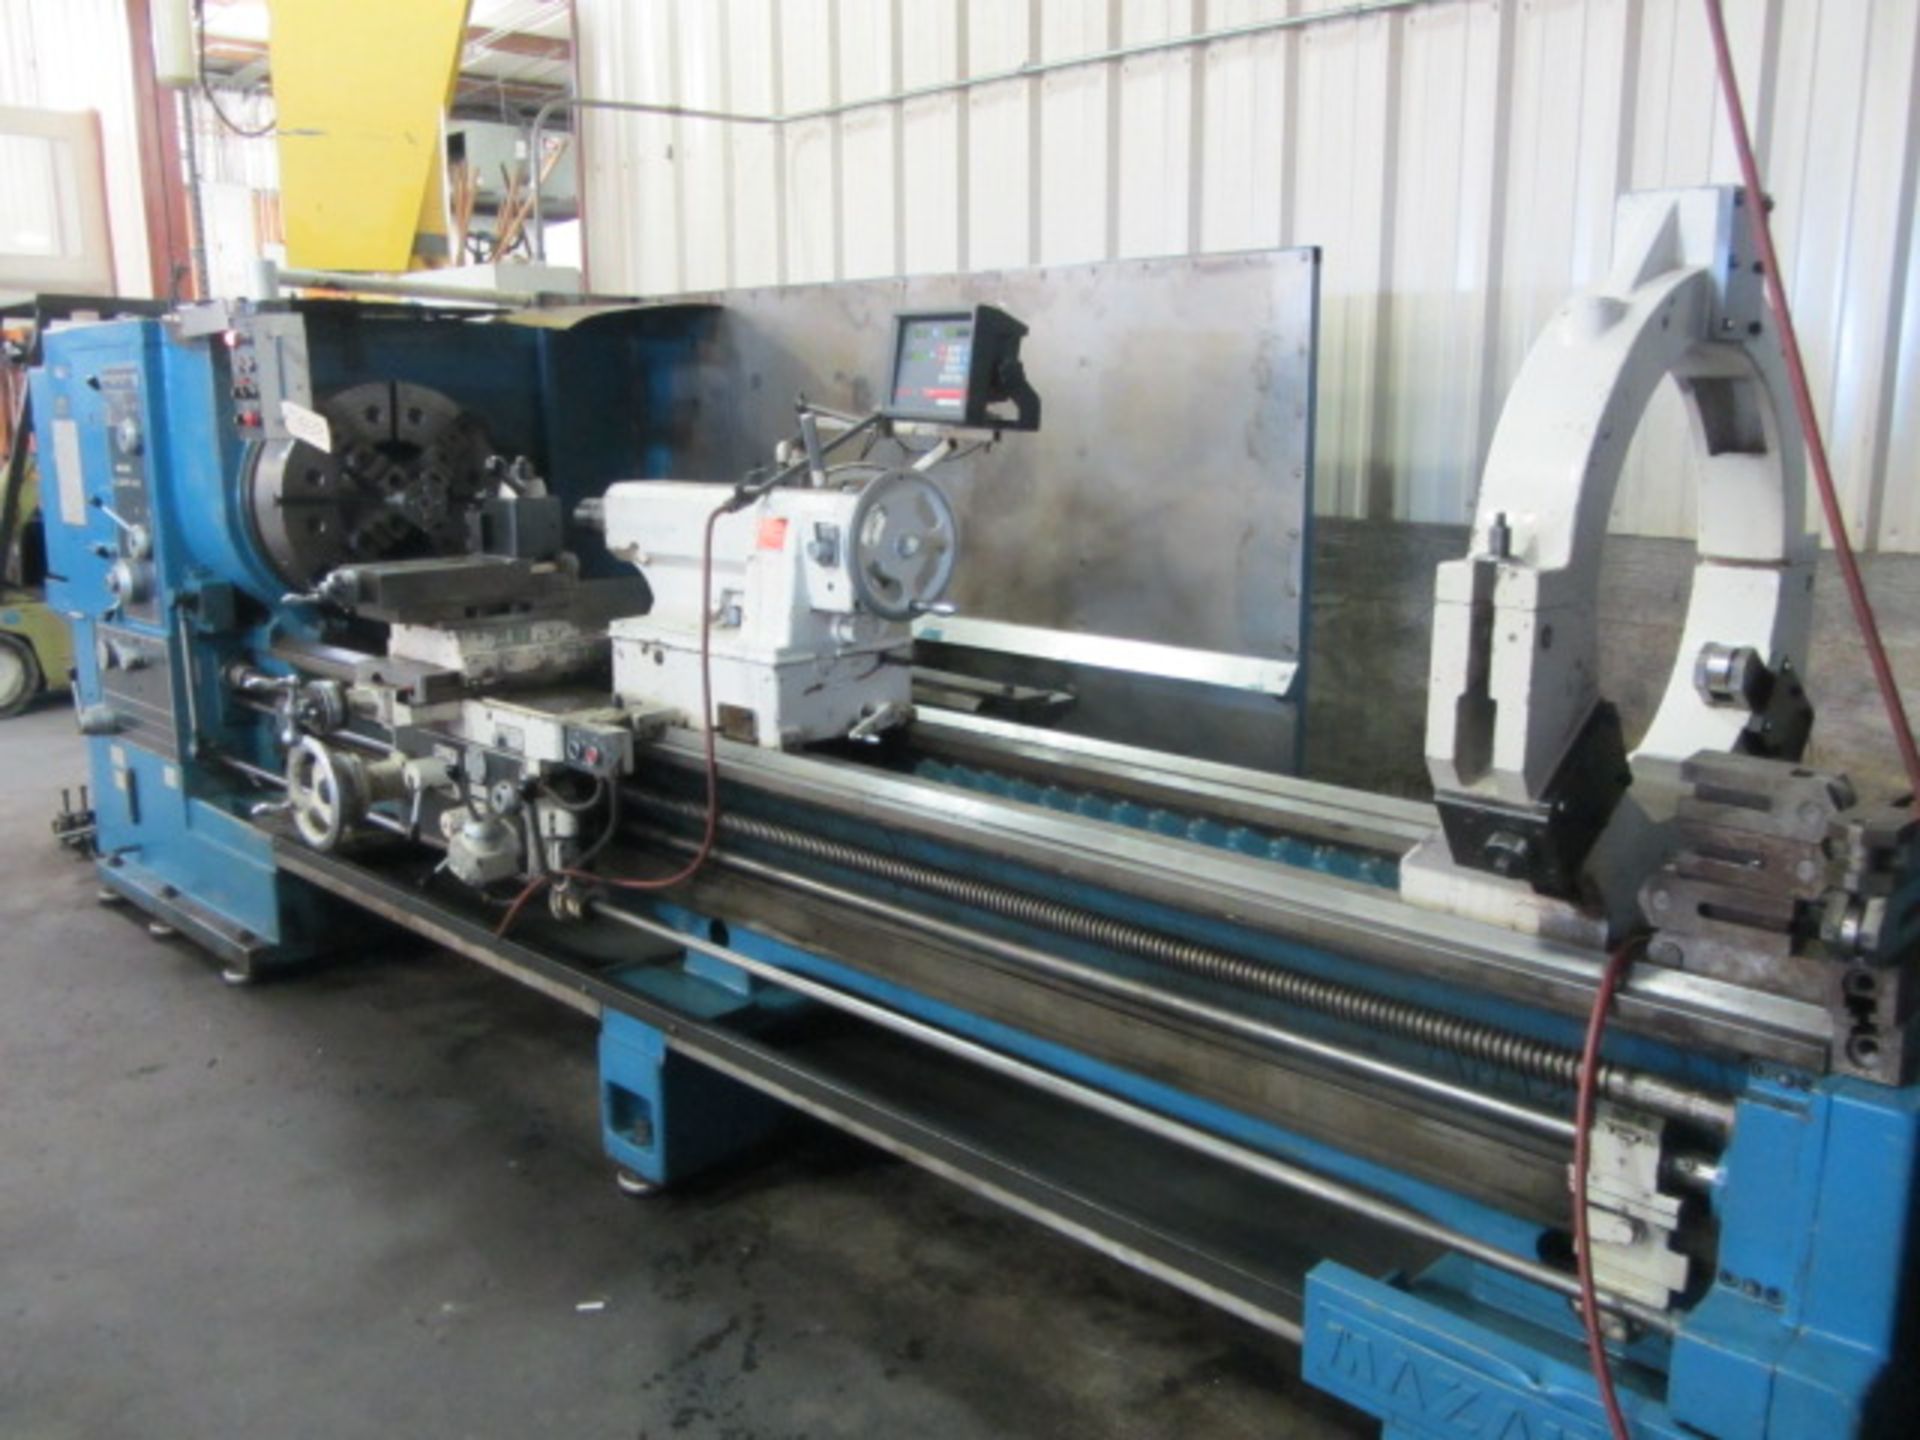 Mazak Heavy Duty Oil Country Engine Lathe with Dual 24'' 4-Jaw Chucks, 34'' Swing Over Bed x 100'' - Image 6 of 7